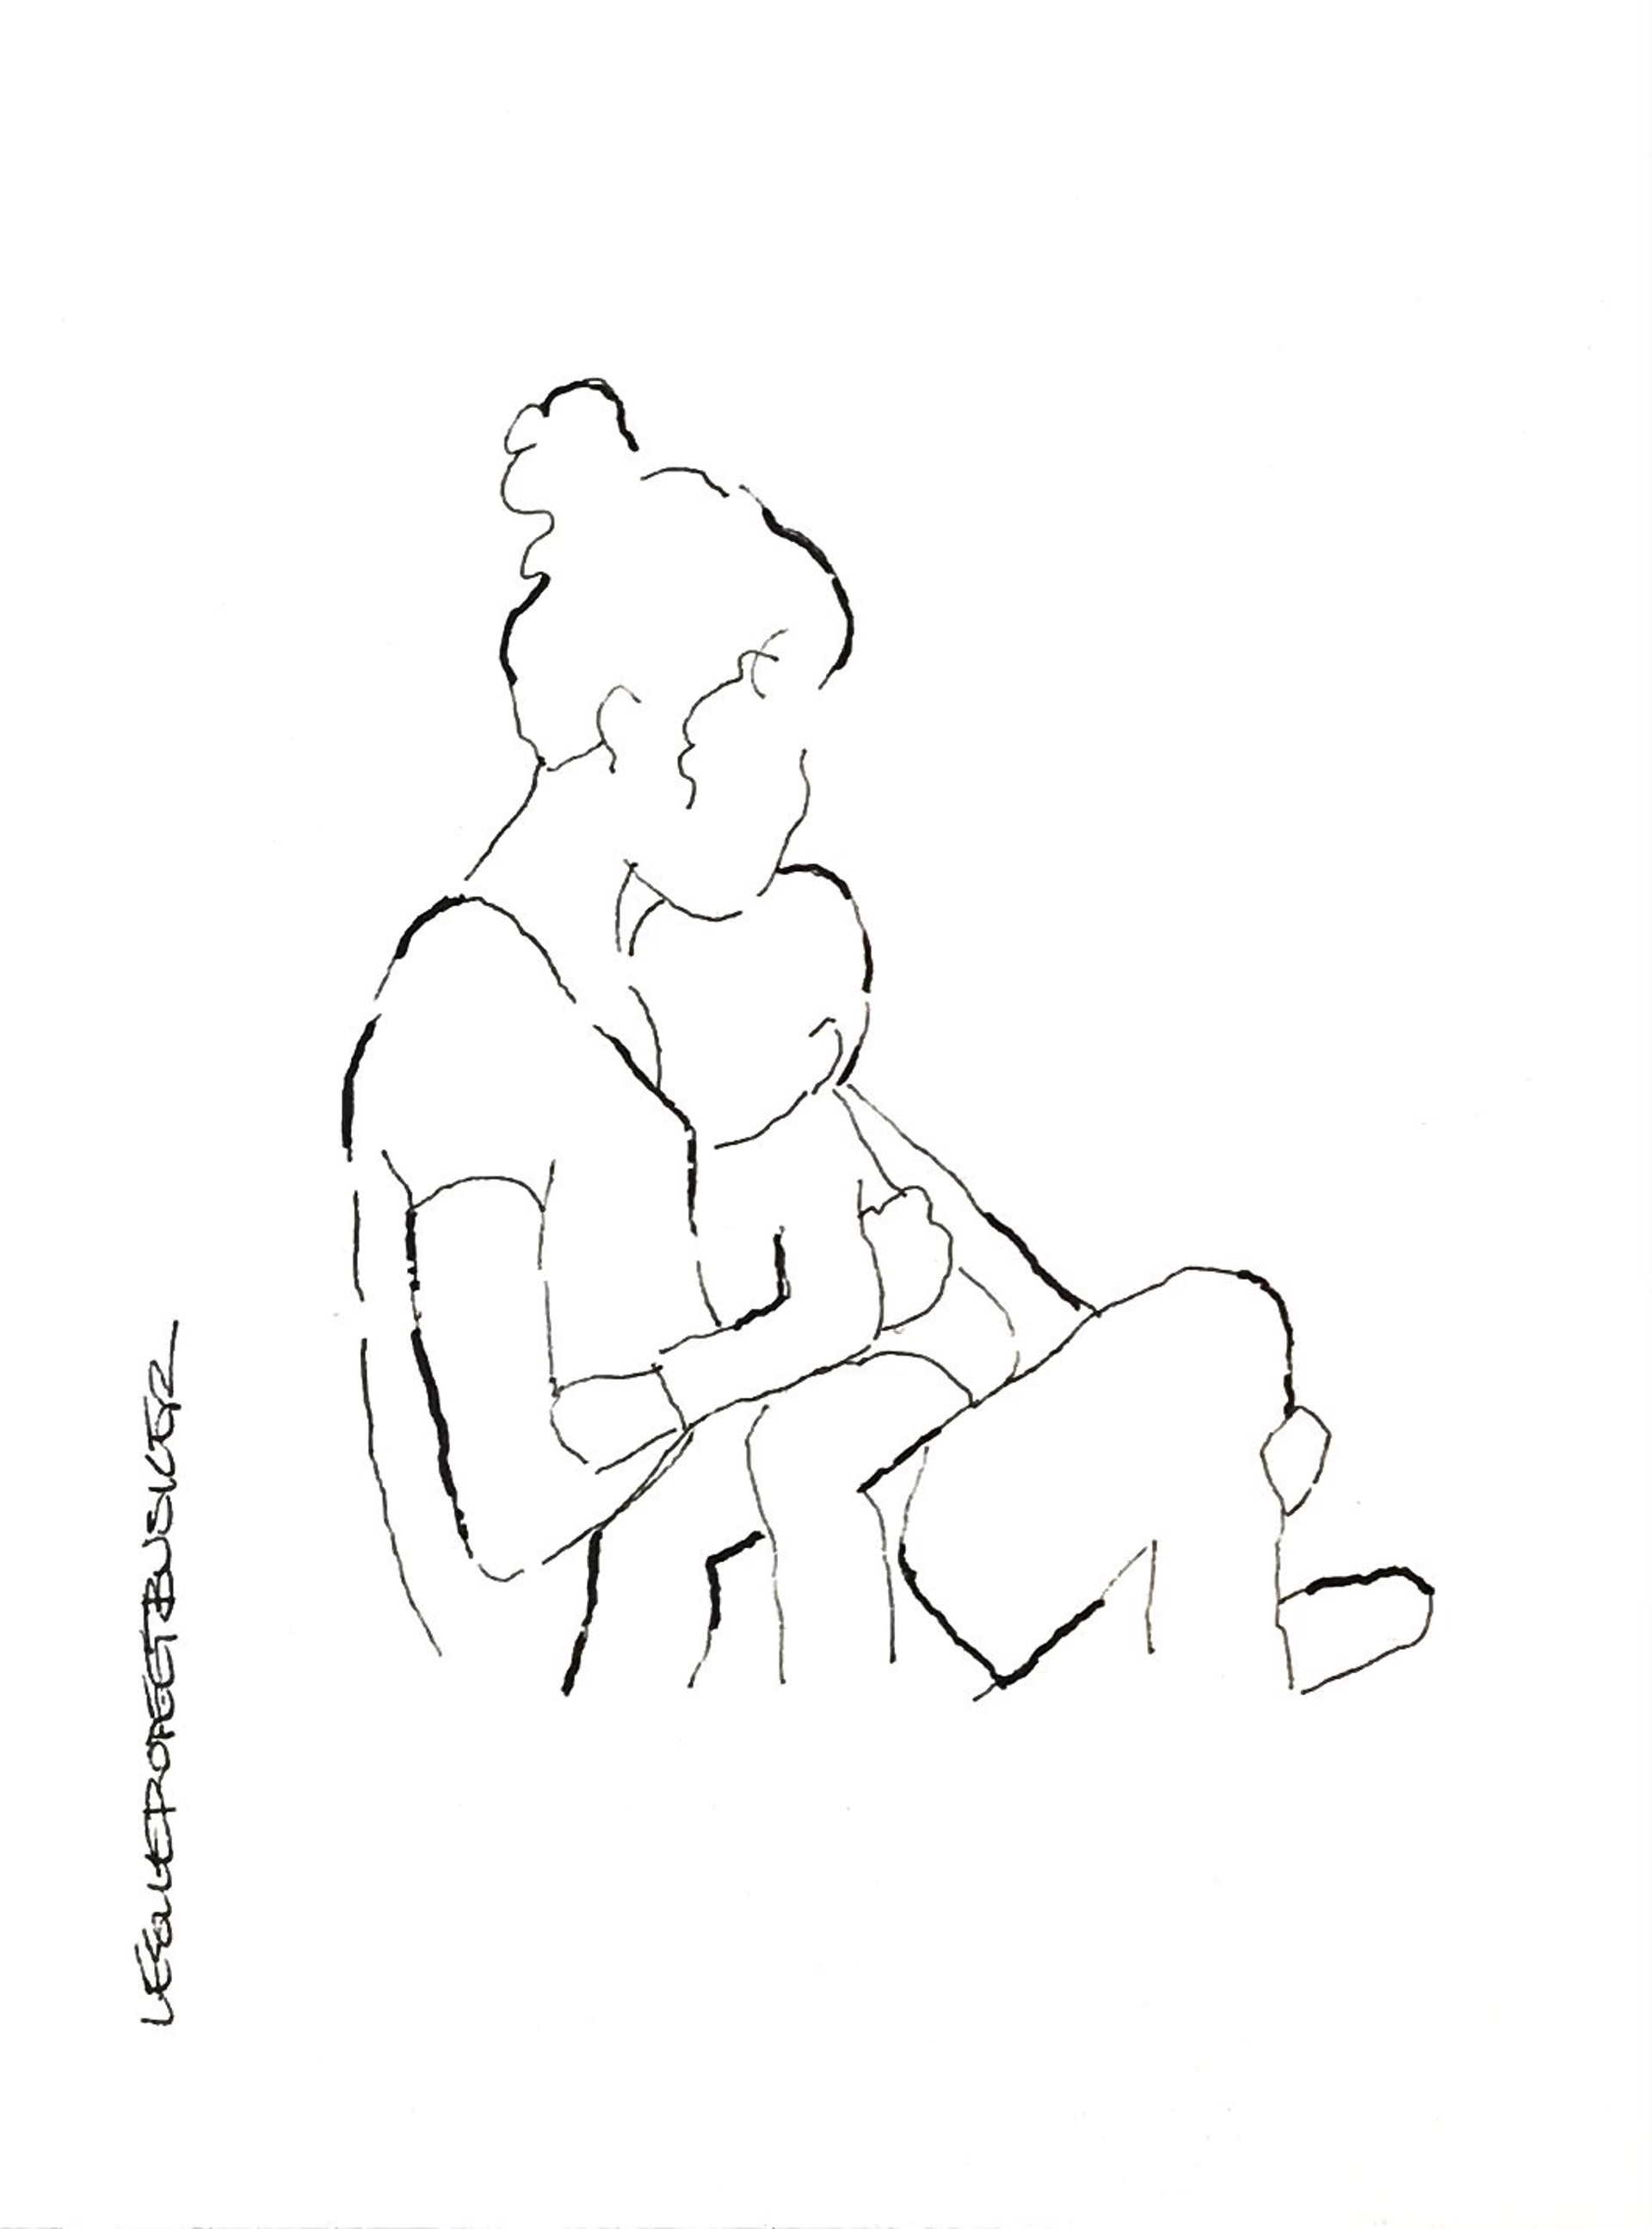 Mother and Child No. 21 by Leslie Poteet Busker